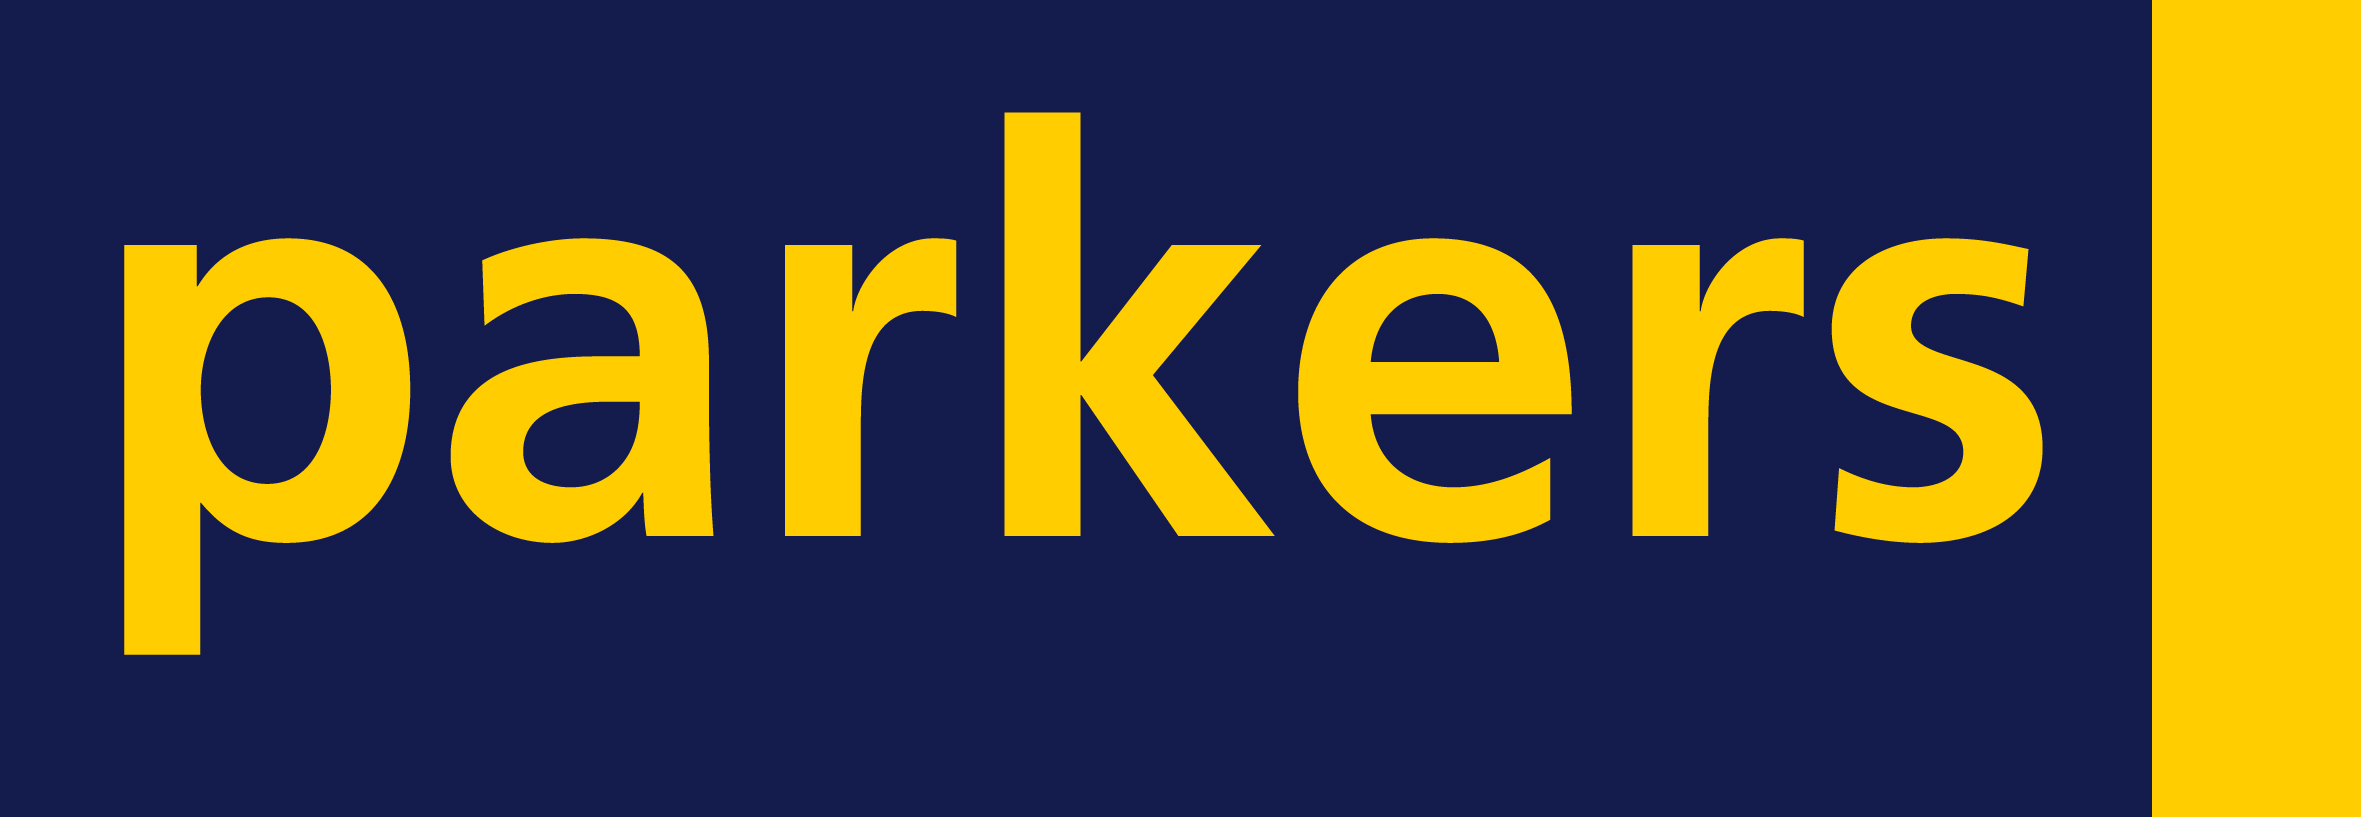 Parkers Earley Lettings & Estate Agents